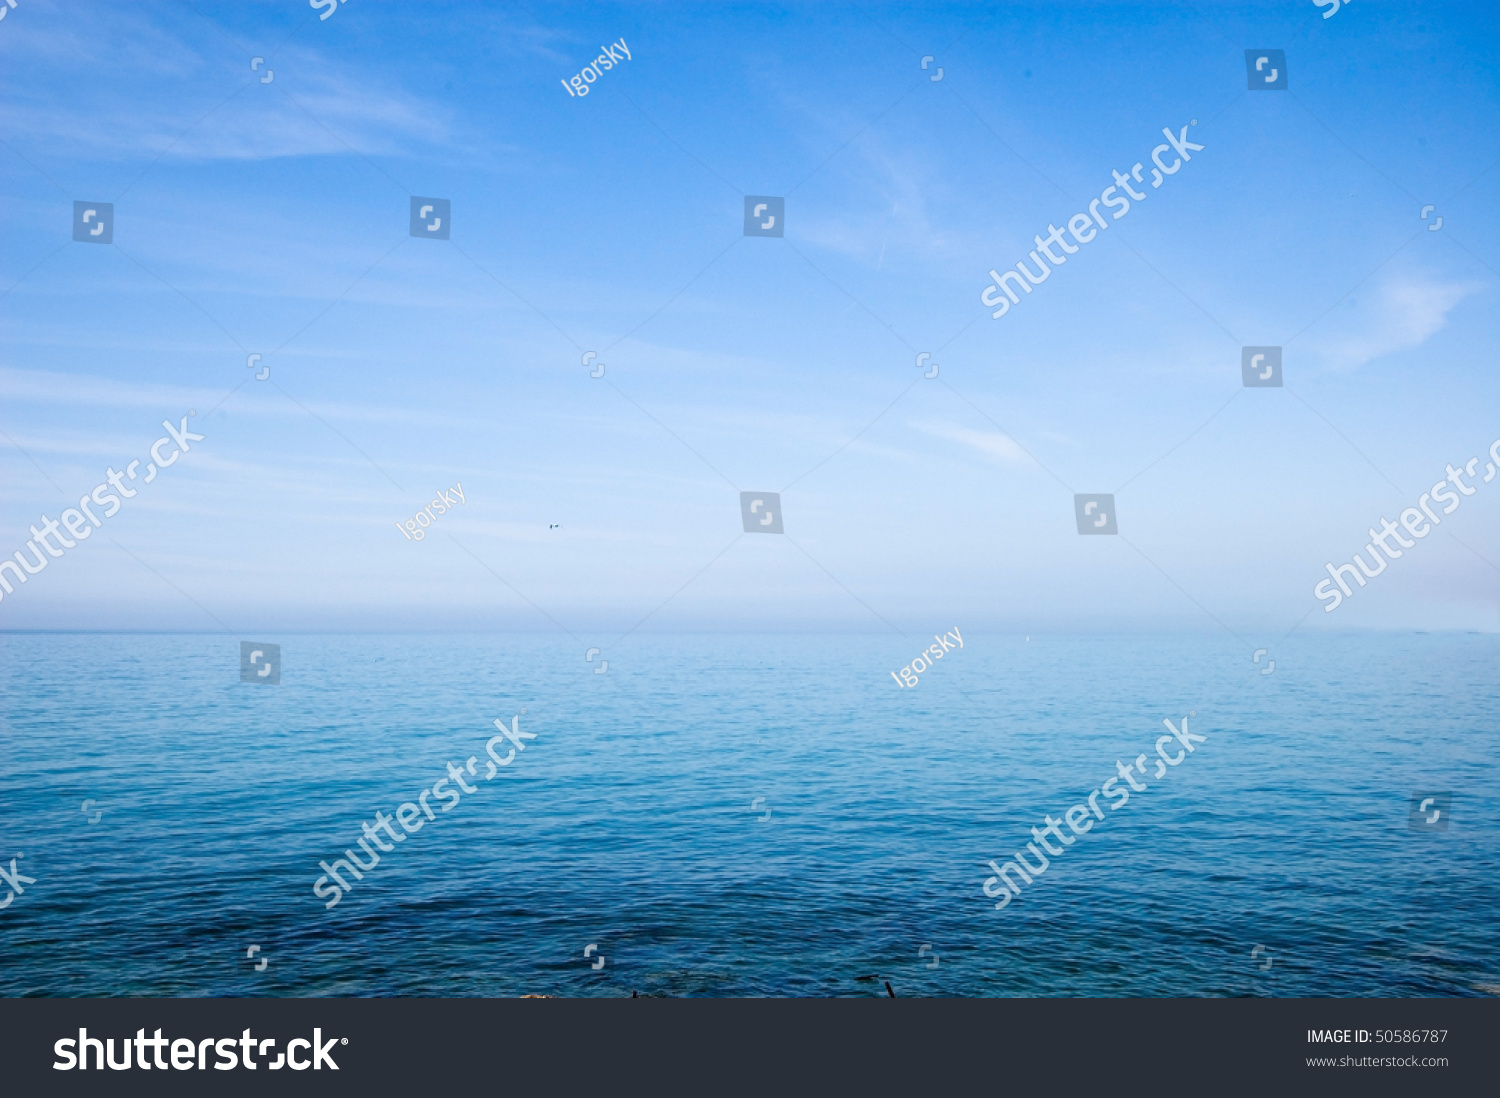 sea and sky background #50586787